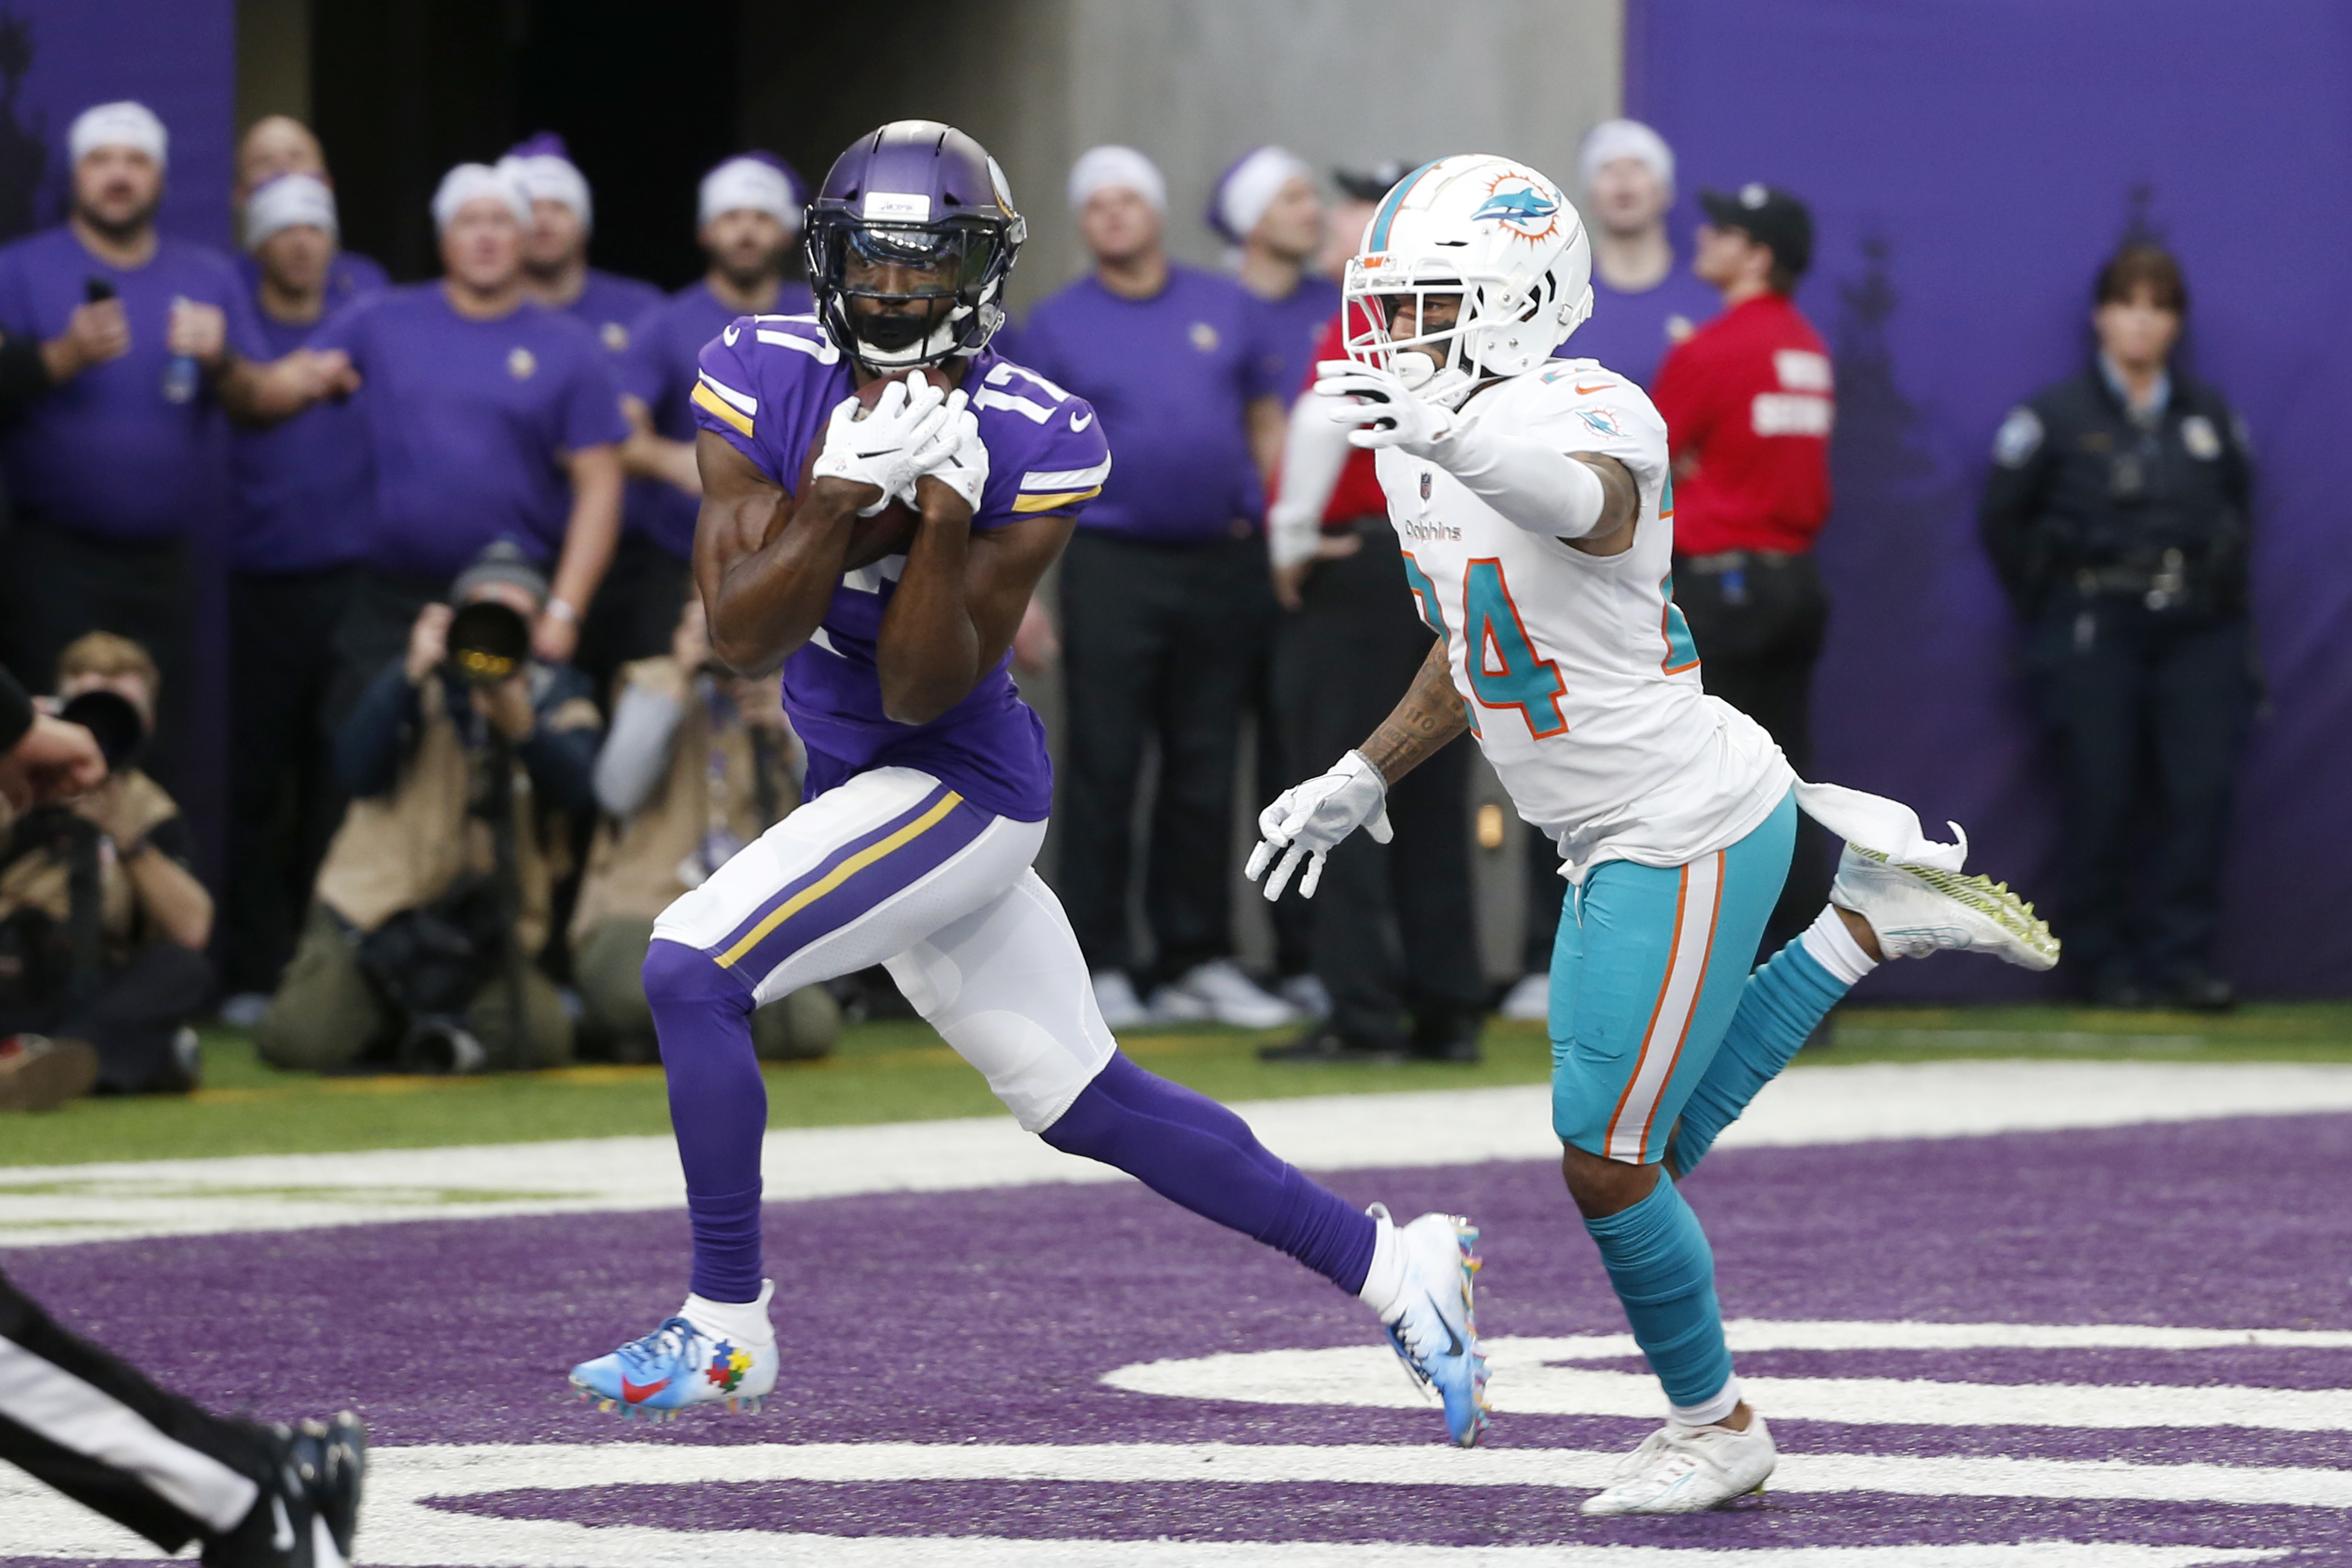 Wide receiver Aldrick Robinson signed with the Vikings in September after being released by San Francisco. Since then, he has proven to be an asset to the team and has meshed well with his teammates and says he's happy to be playing in Minnesota.